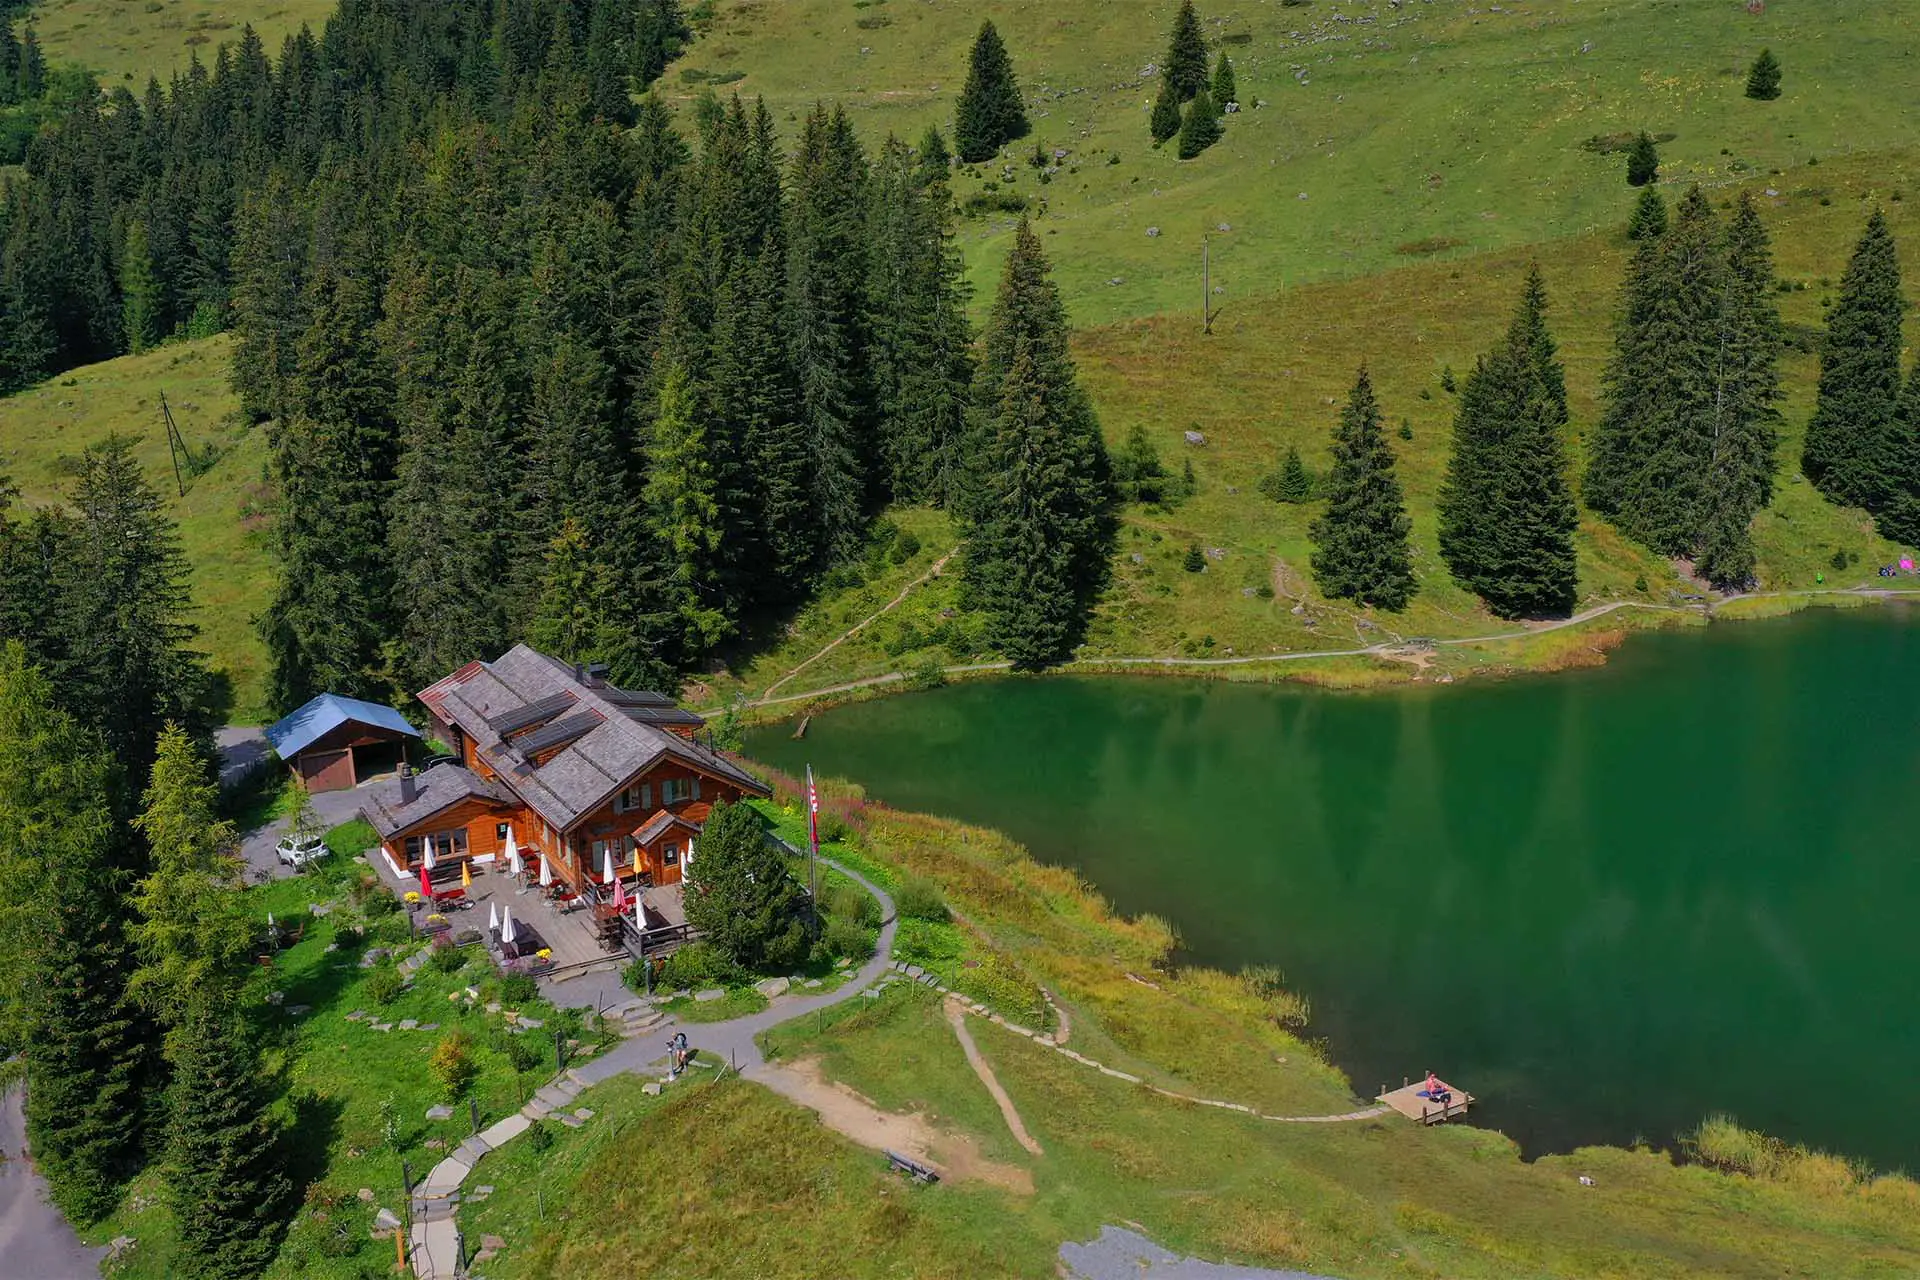 Lac Retaud is an unknown Lake near Gstaad.